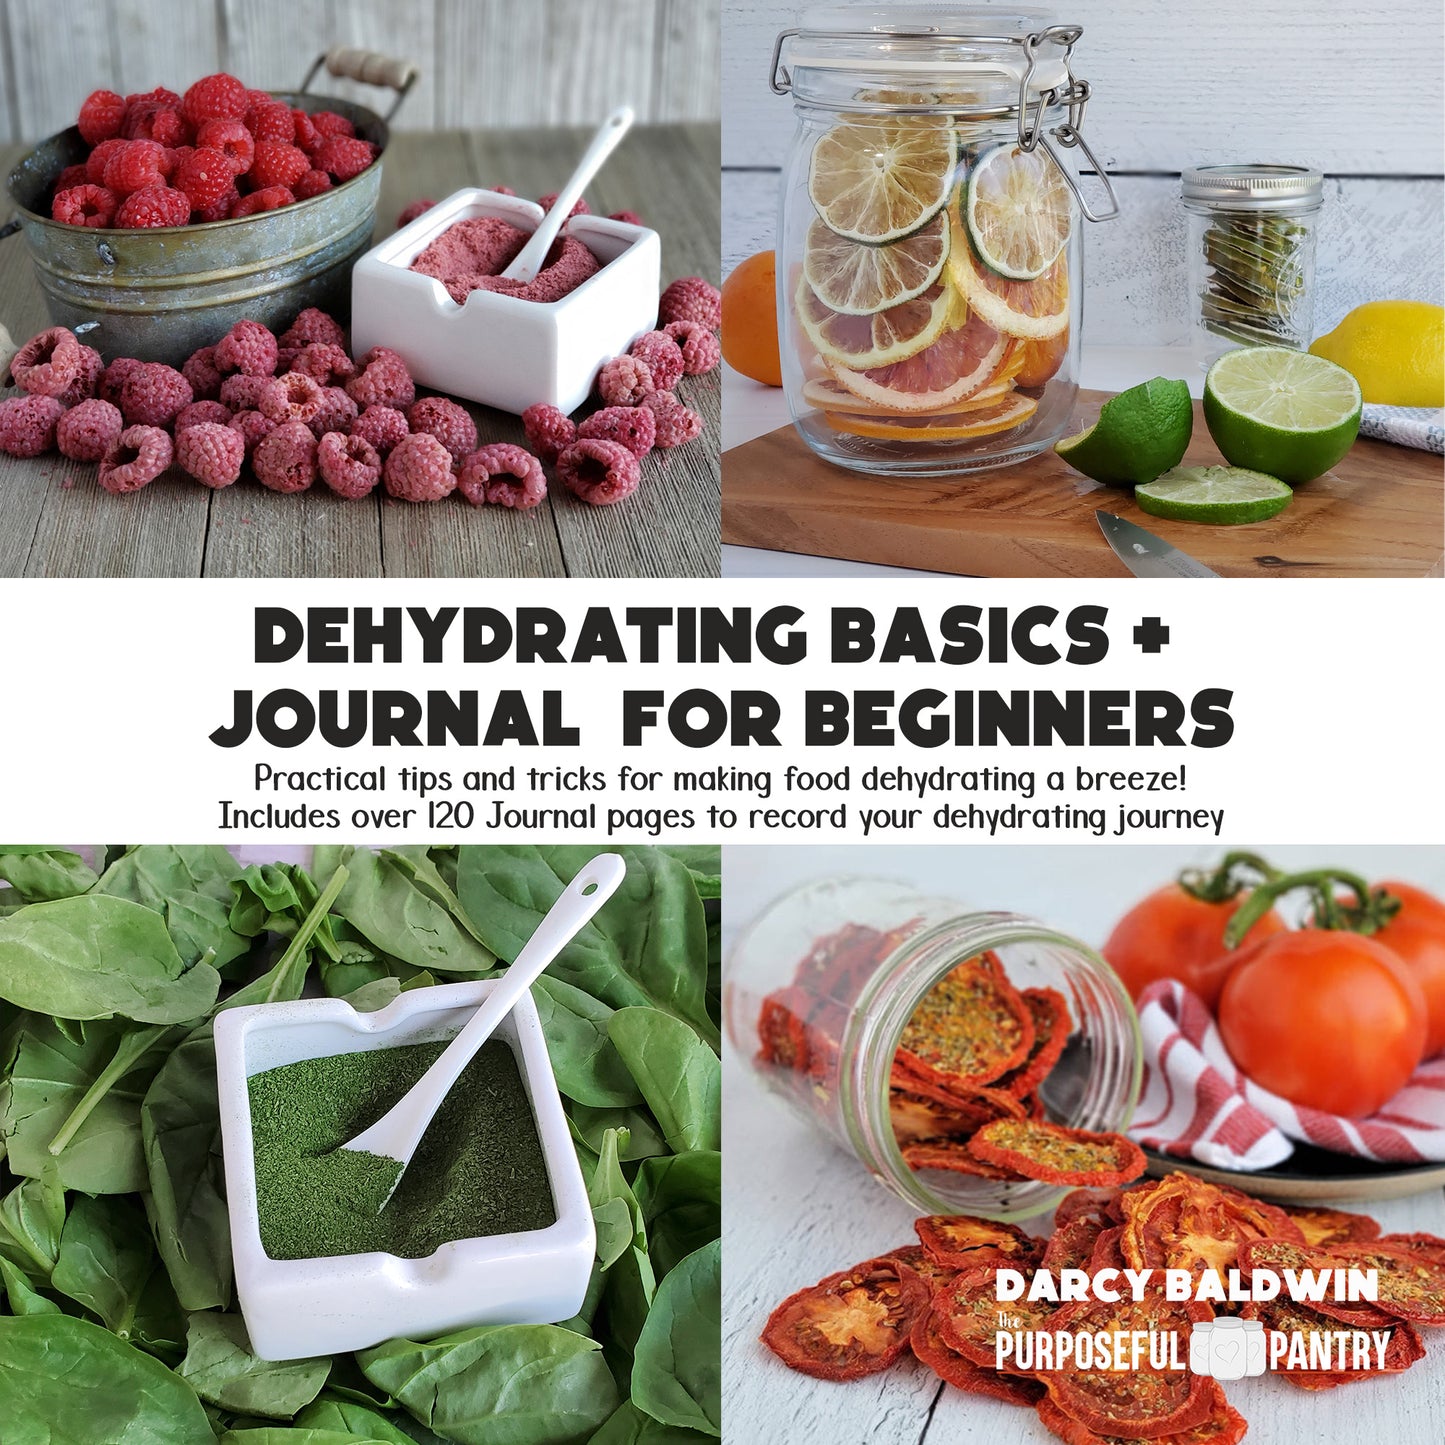 The Purposeful Pantry Dehydrating Basics & Journal Book for beginners.